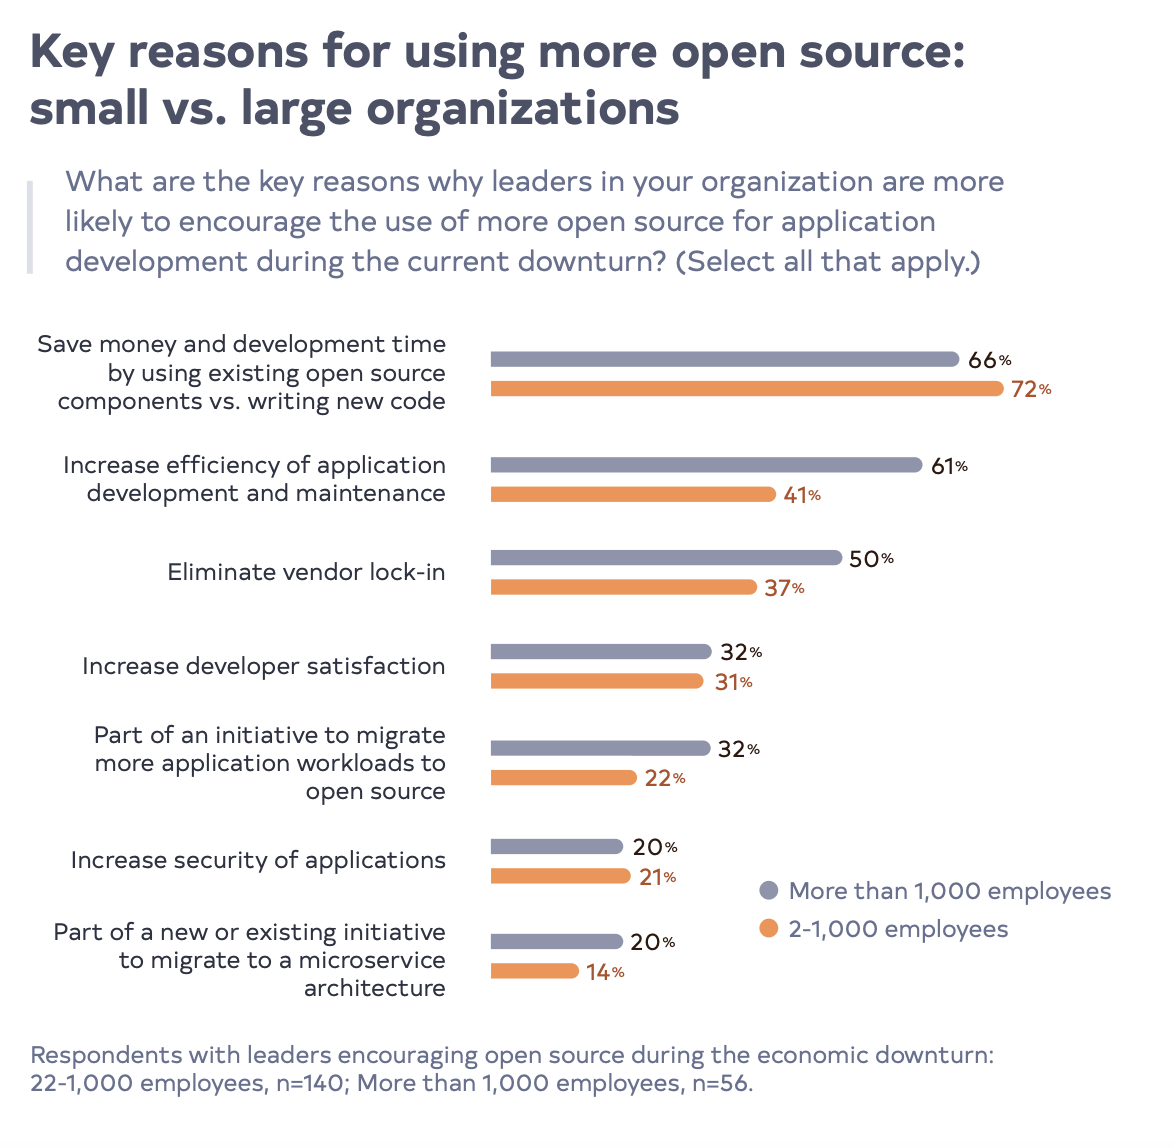 Key reasons for using more open source: small vs. large organizations